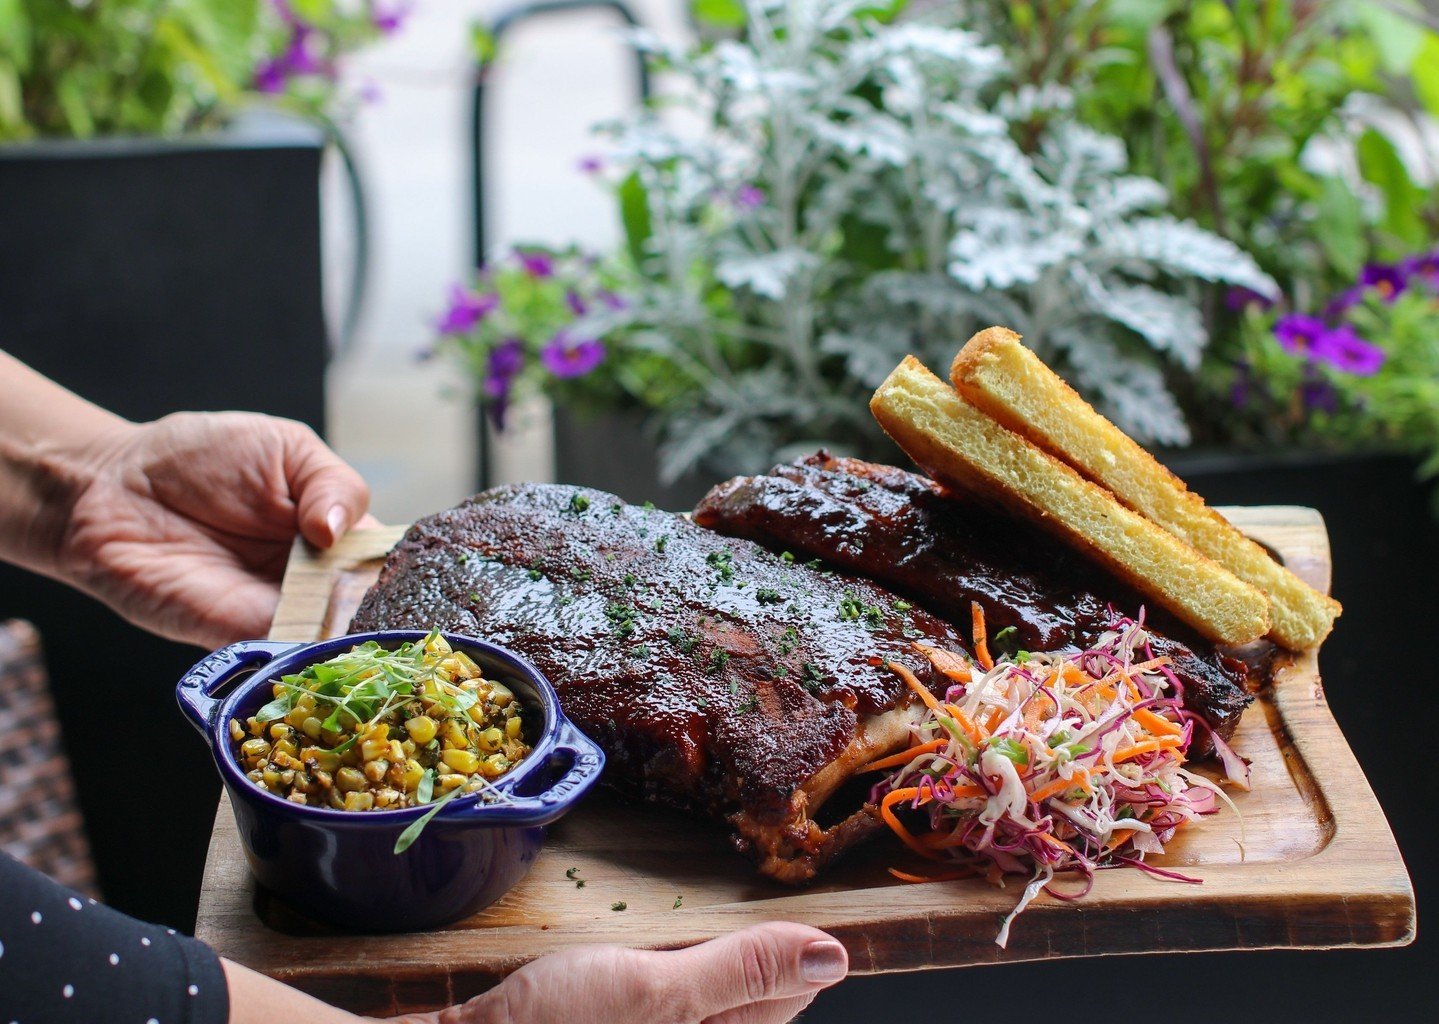 Memorial Day Weekend calls for BBQ on the patio 🍖 Today and tomorrow join us for specials alongside our regular menu⁠
⁠
Hickory Smoked BBQ | &frac12; slab baby back ribs, beef brisket, BBQ sauce, rainbow slaw, sweet corn, texas toast, honey whipped 